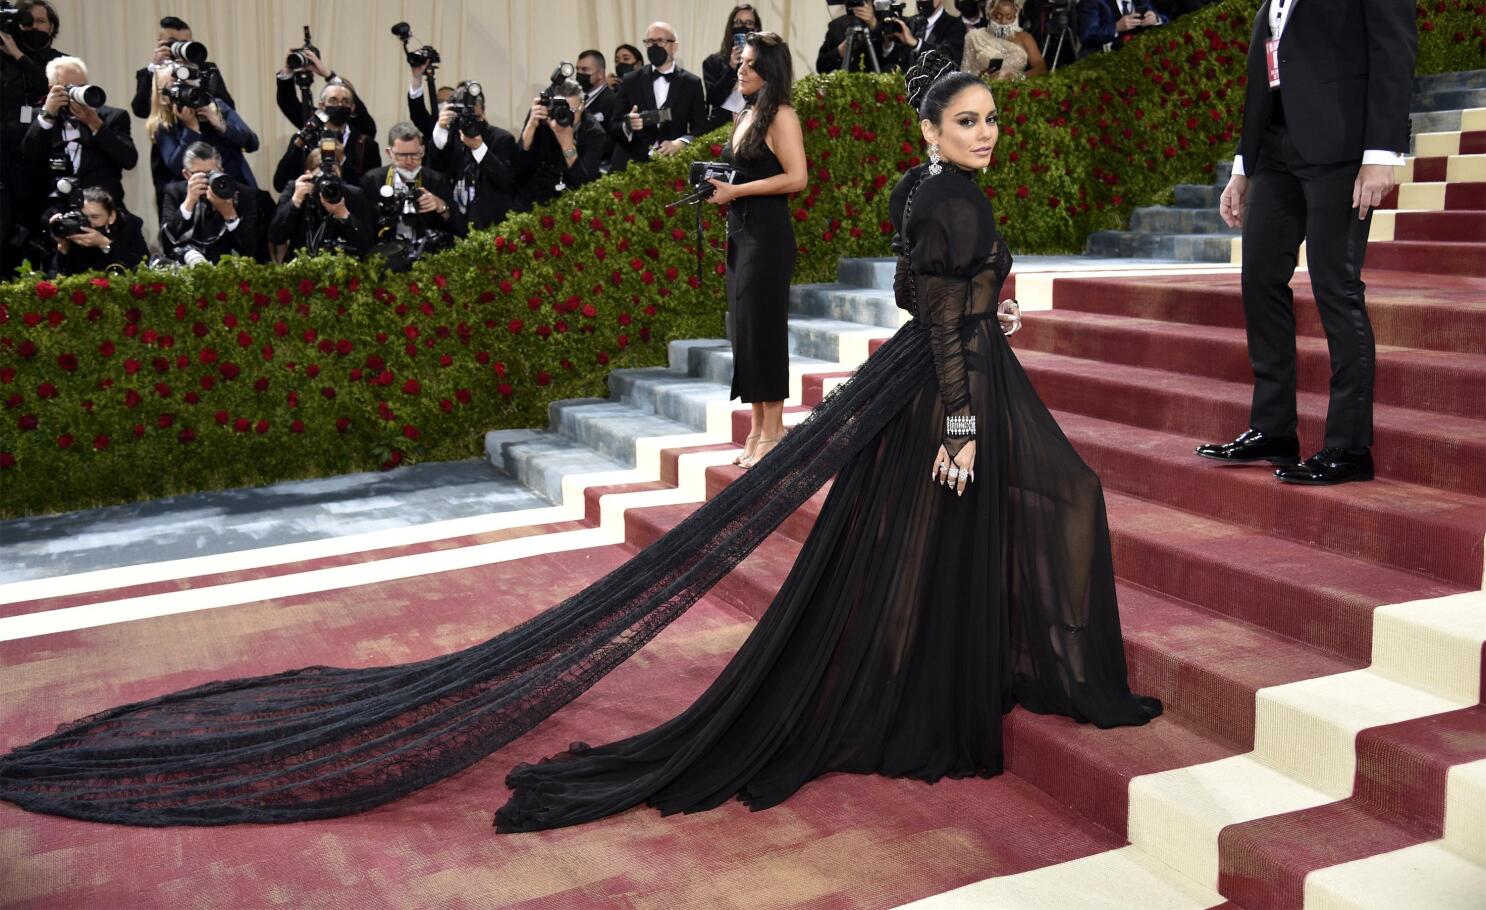 Met Gala 2022: Live updates from the red carpet